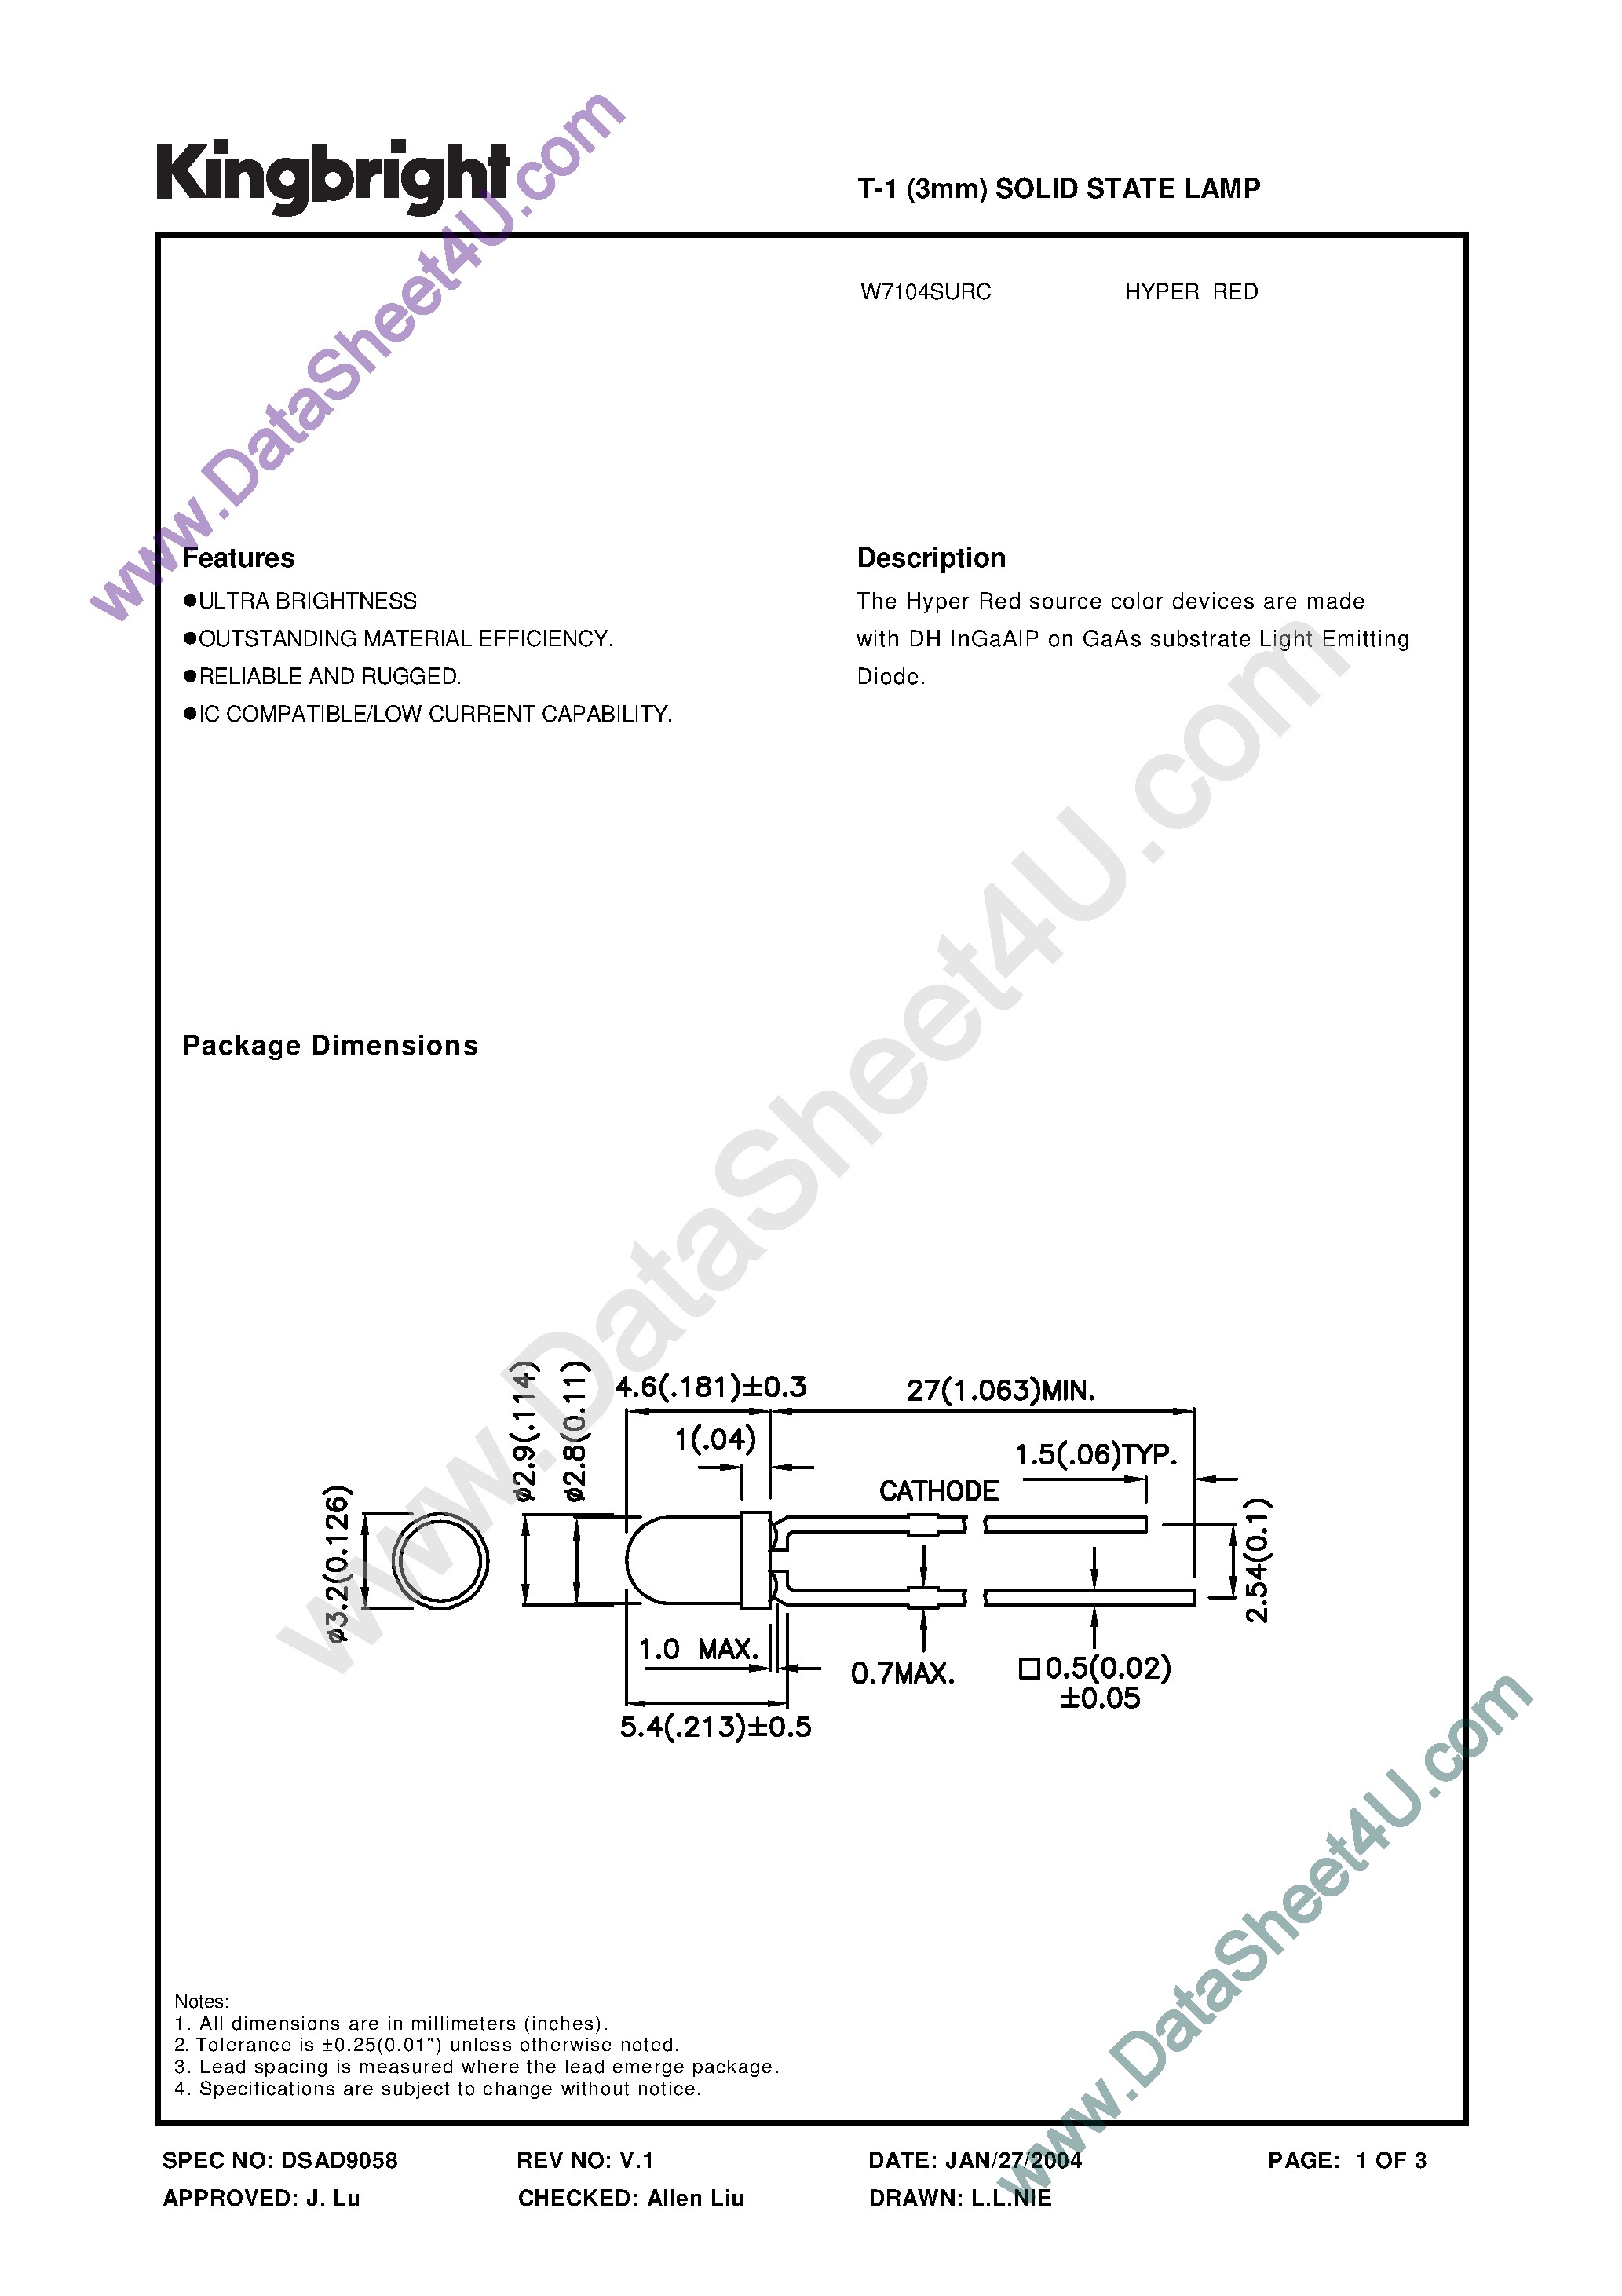 Datasheet W7104SURC - T-1 Solid State Lamp page 1